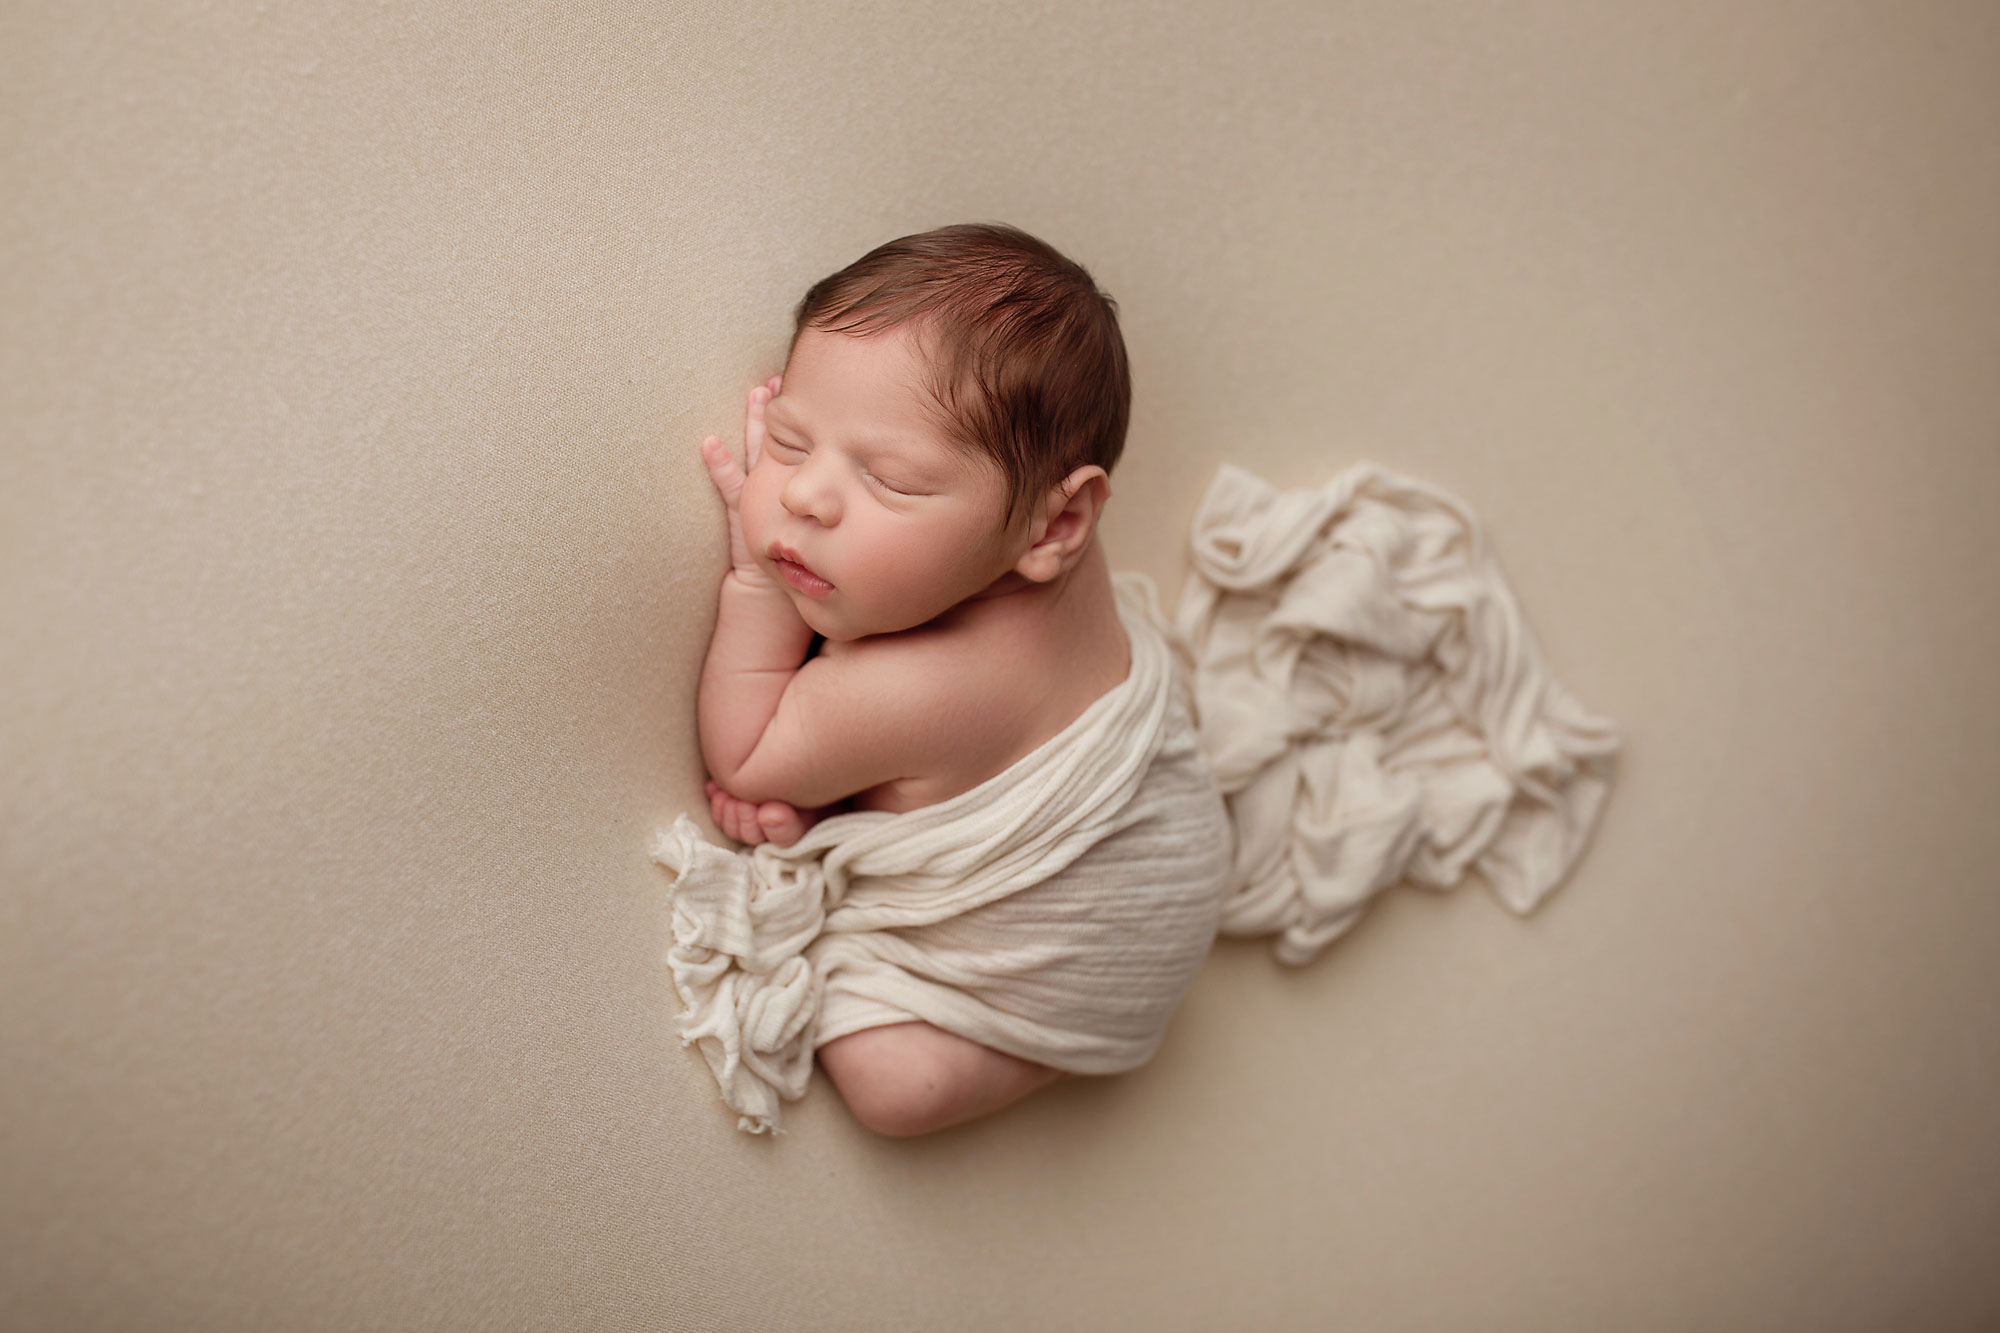 morris county newborn pictures, baby boy asleep on neutral background with blanket